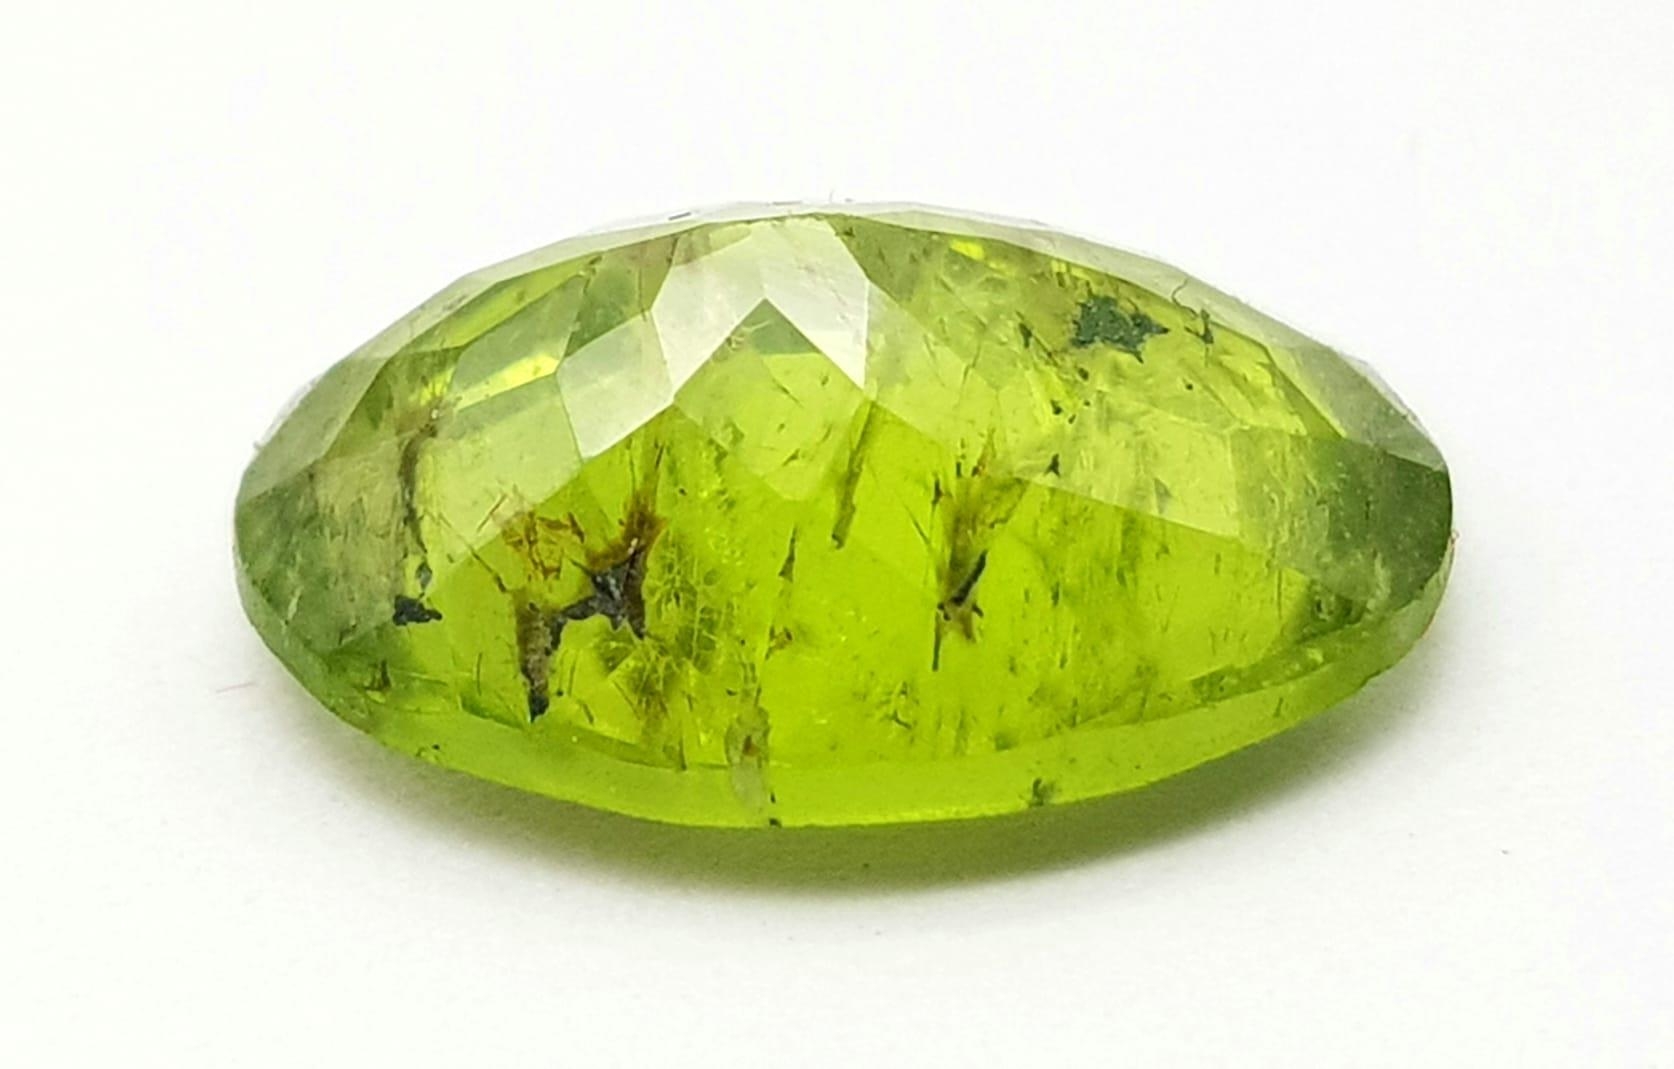 5.30 Ct Faceted Peridot. Olive Green. Oval Cut. Comes with GLI Certificate. - Image 2 of 5